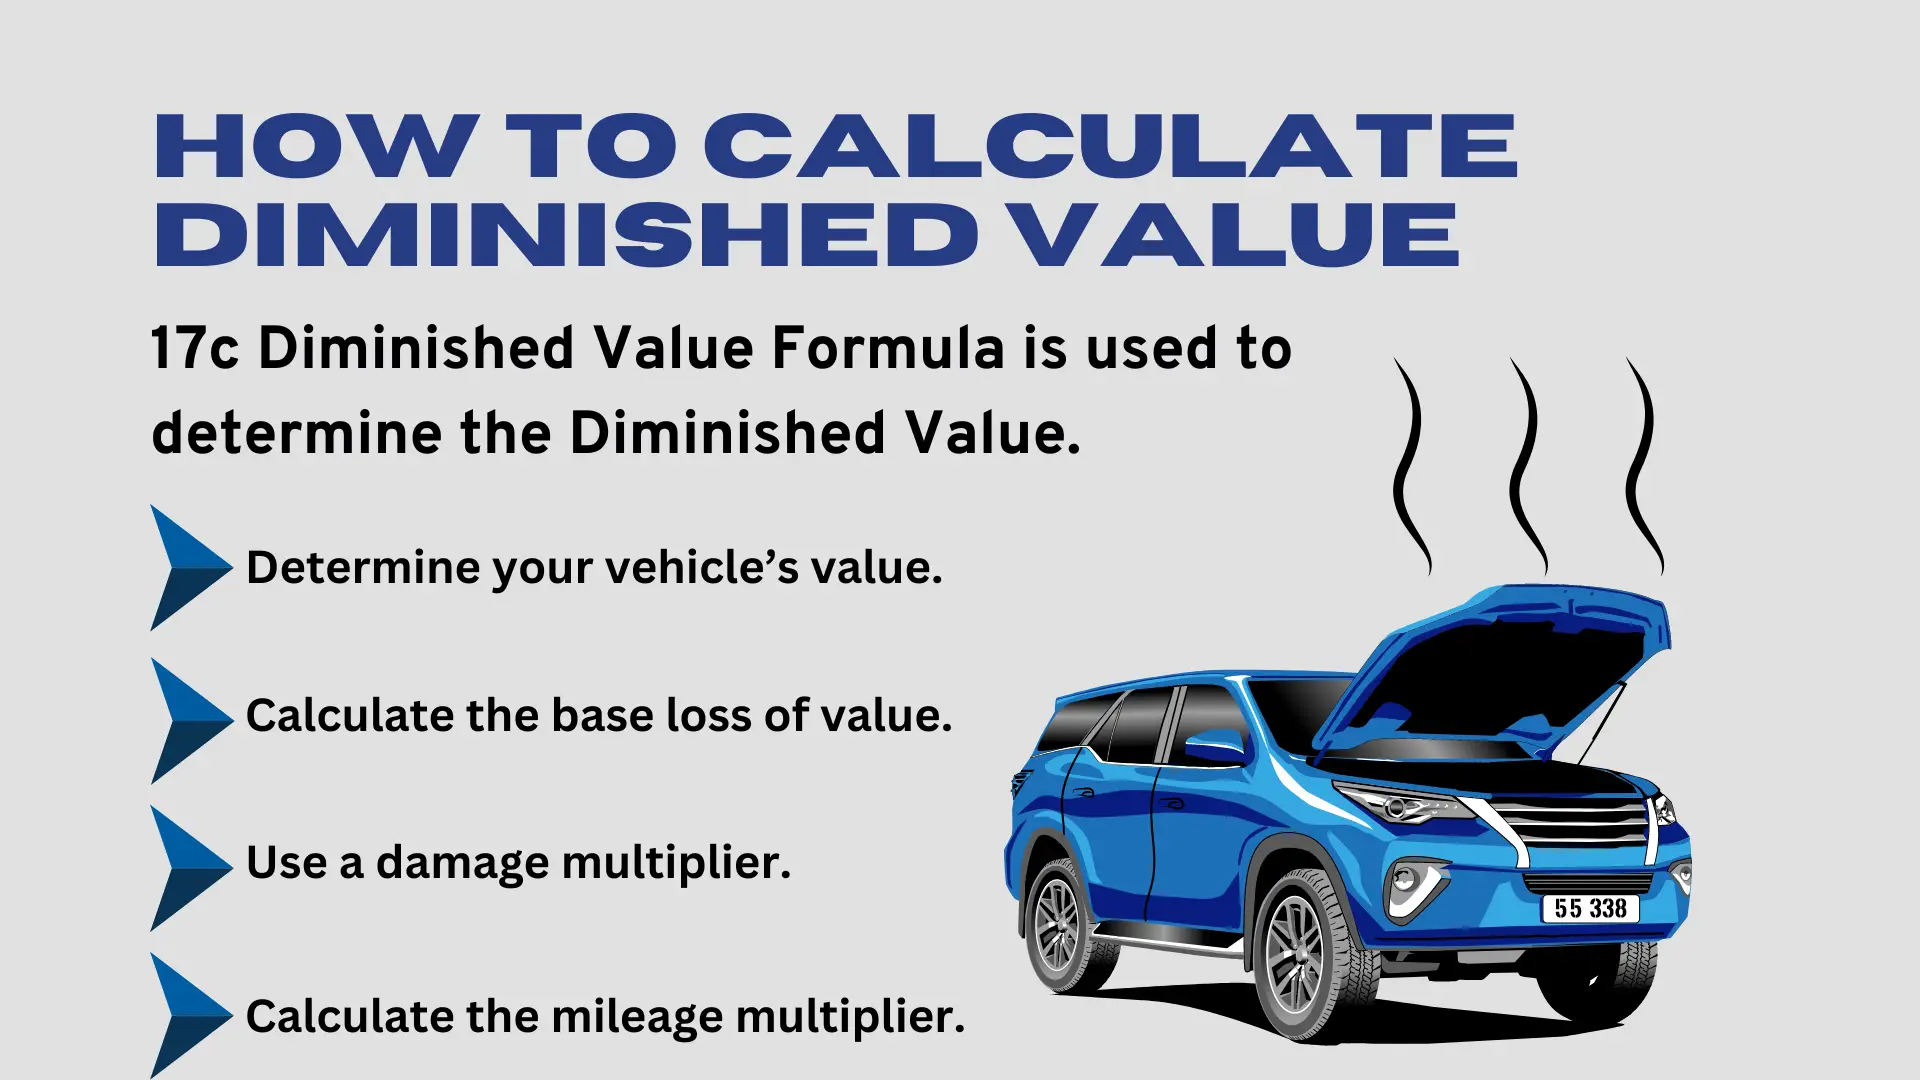 How to Calculate Diminished Value